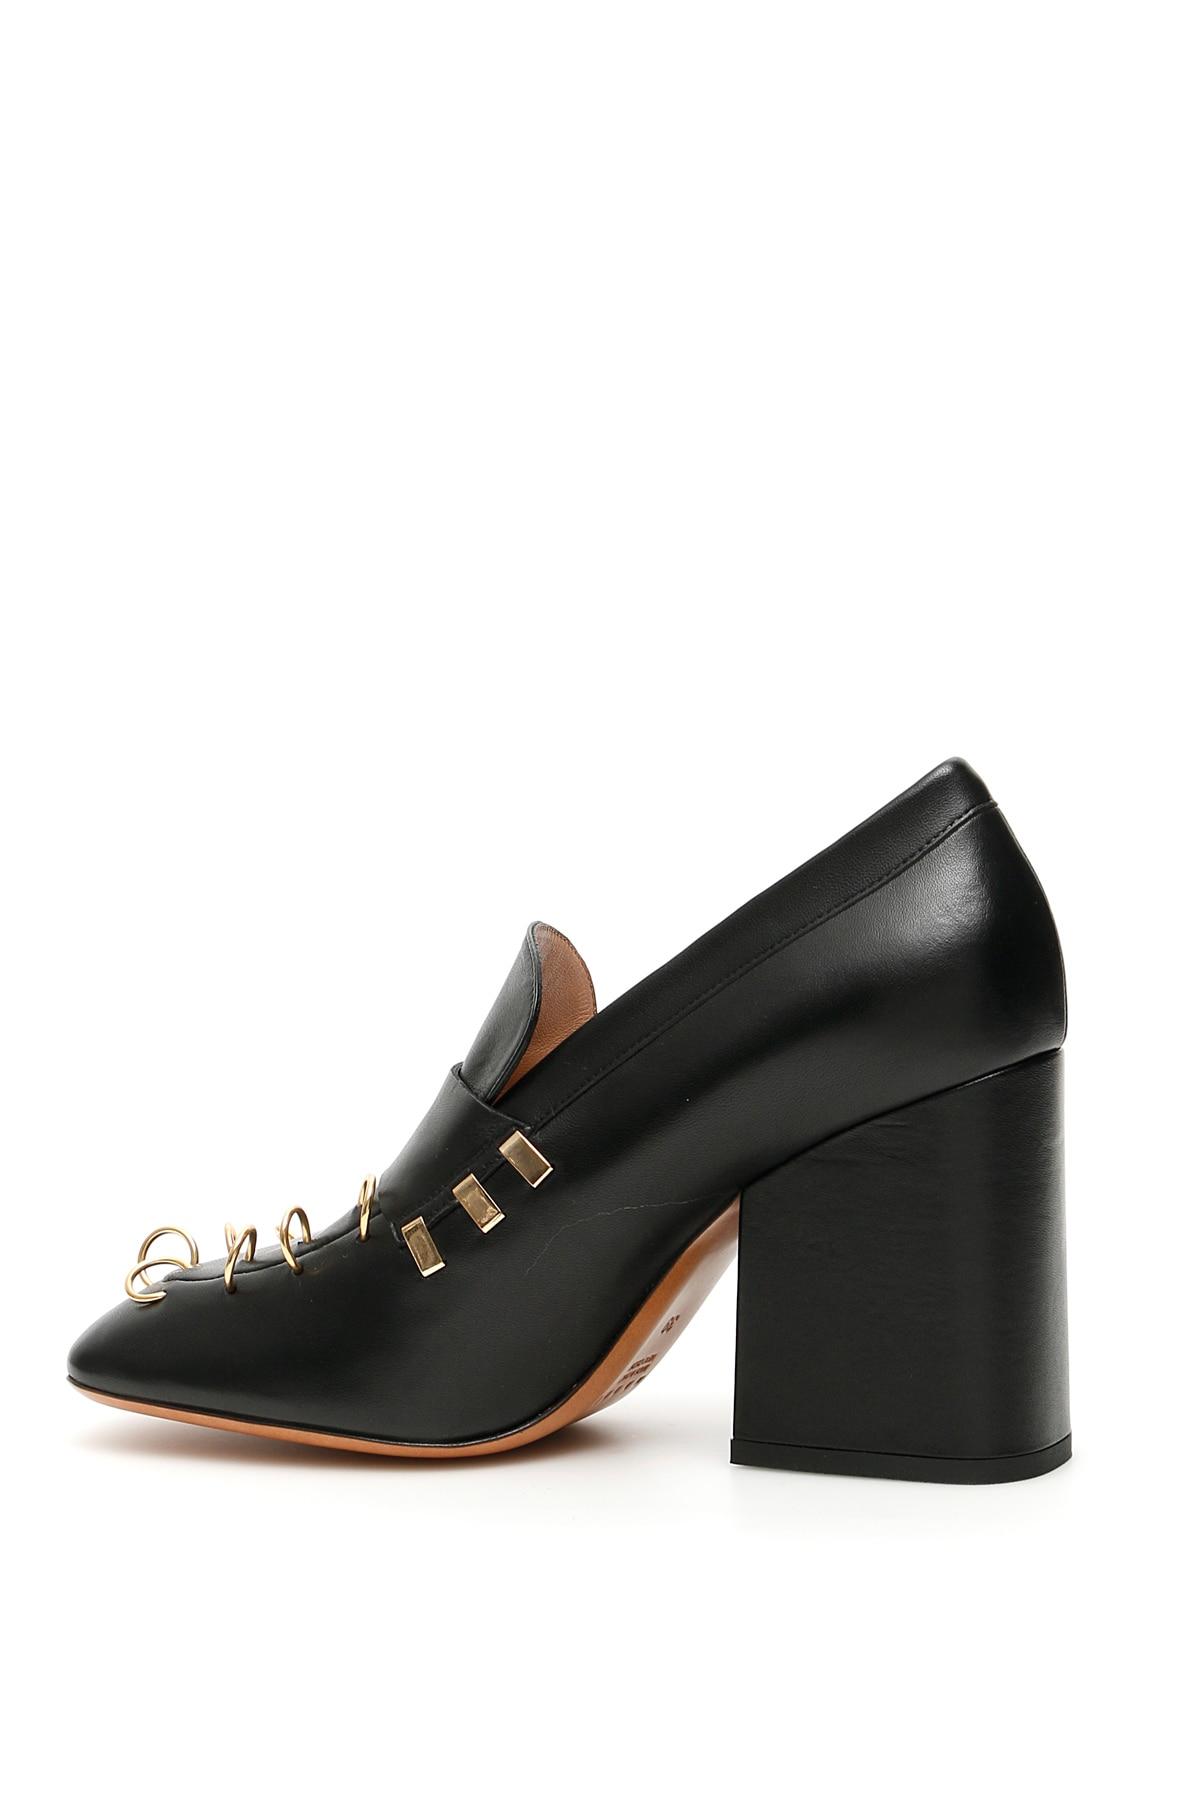 Marni Piercing Loafers in Black | Lyst